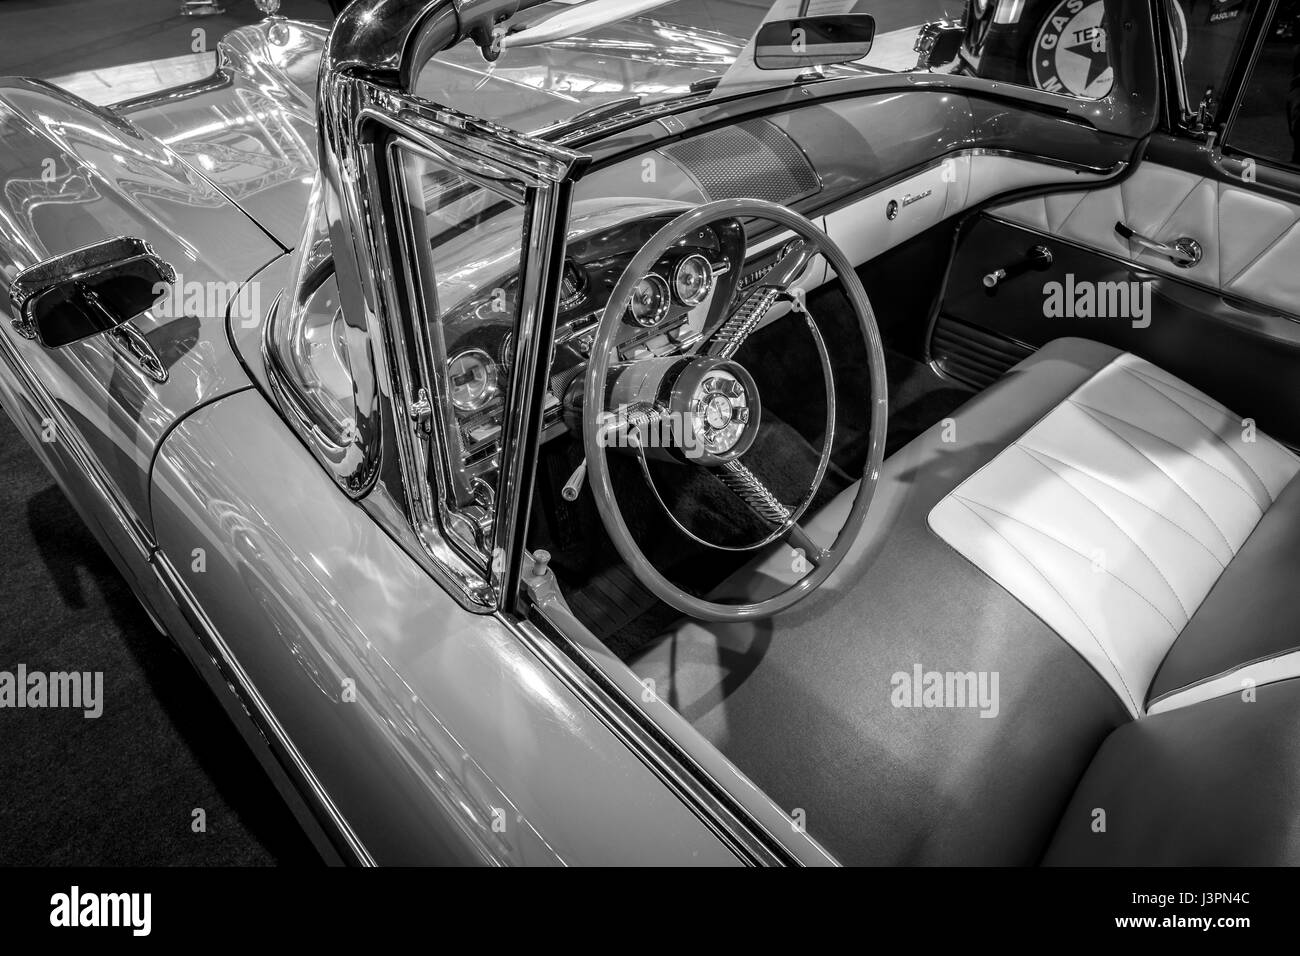 STUTTGART, GERMANY - MARCH 03, 2017: Interior of a full-size car Edsel Pacer Convertible, 1958. Black and white. Europe's greatest classic car exhibition 'RETRO CLASSICS' Stock Photo